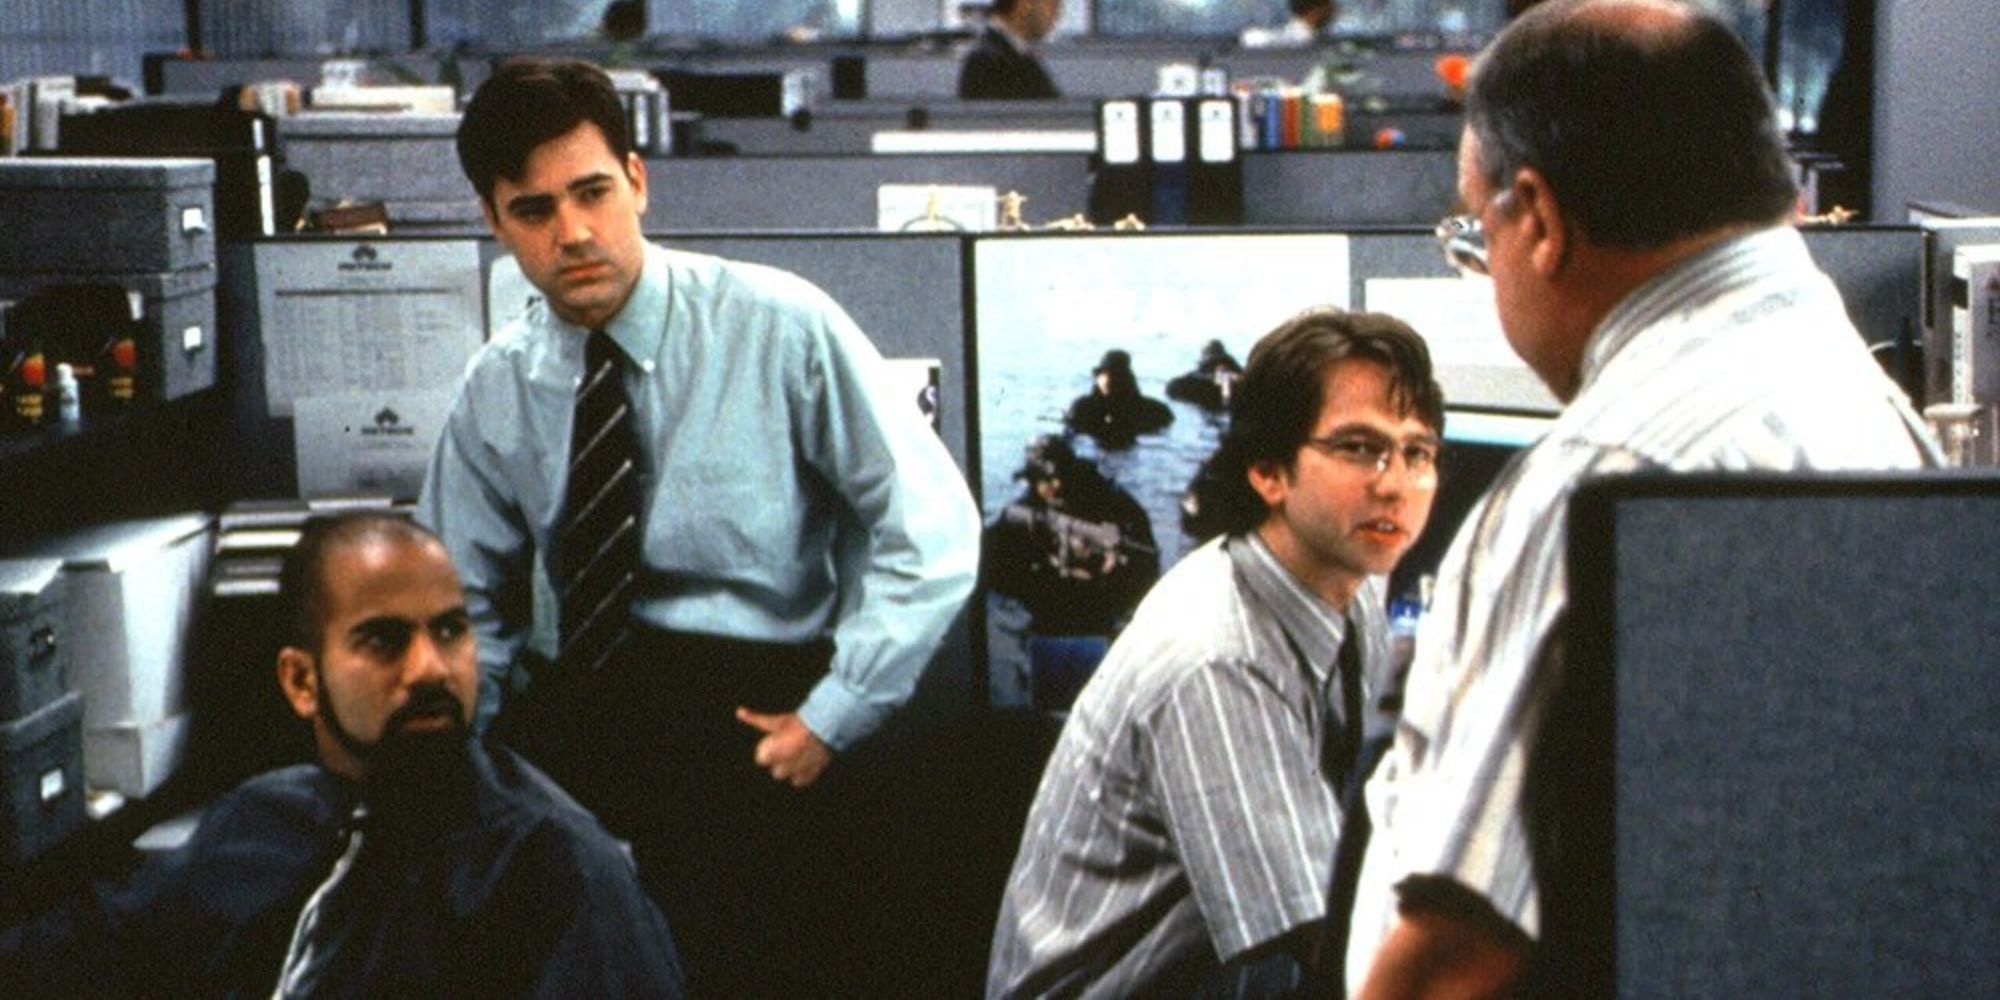 Ron Livingston as Peter Gibbons with his co-workers in the film 'Office Space' (1999)